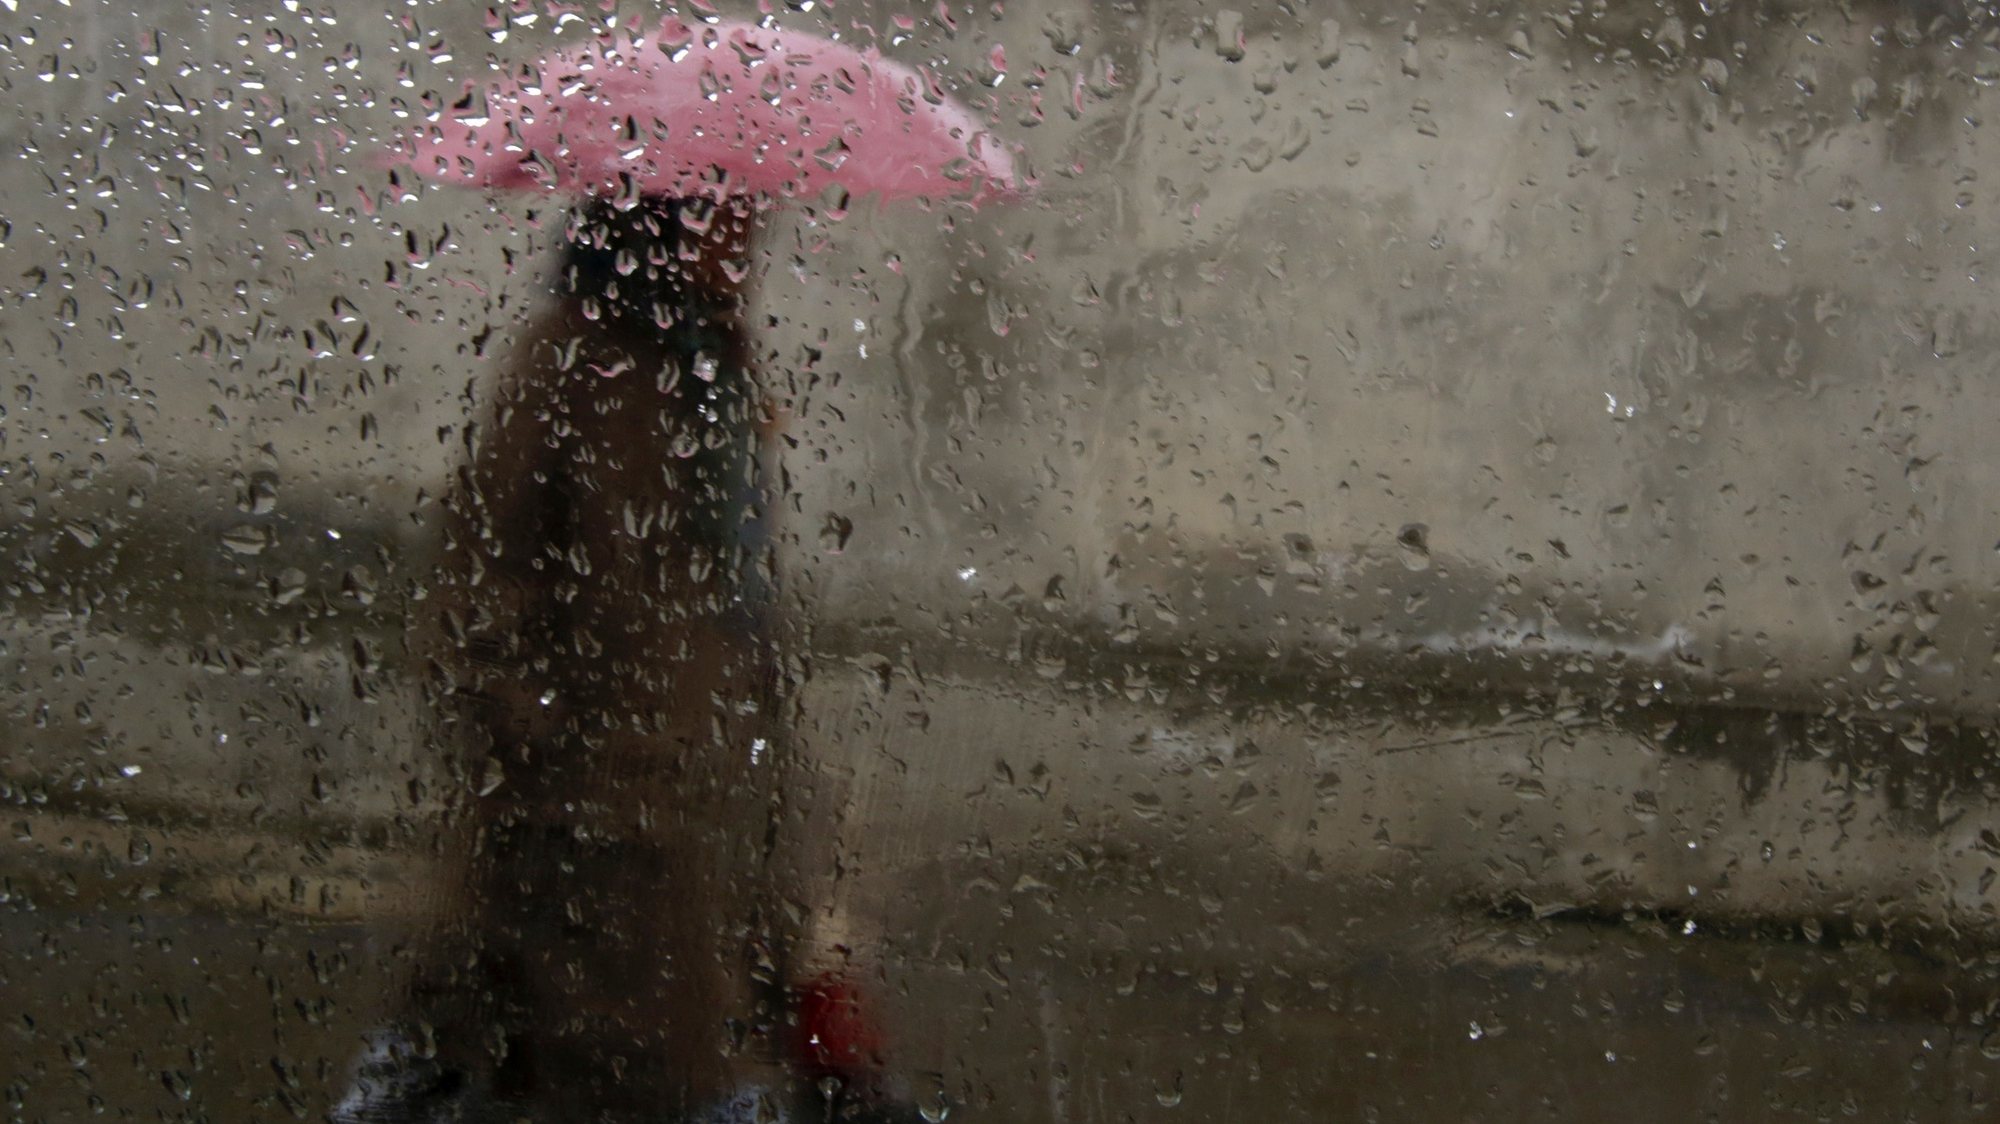 epa07333679 Kashmiri women holding an umbrella seen through a car window during rain in Srinagar, the summer capital of Indian Kashmir, 31 January 2019. Srinagar-Jammu highway which connects Indian Kashmir with the rest of the world was closed for traffic and several flights were cancelled at Srinagar airport due to bad weather and poor visibility, according to local news reports.  EPA/FAROOQ KHAN